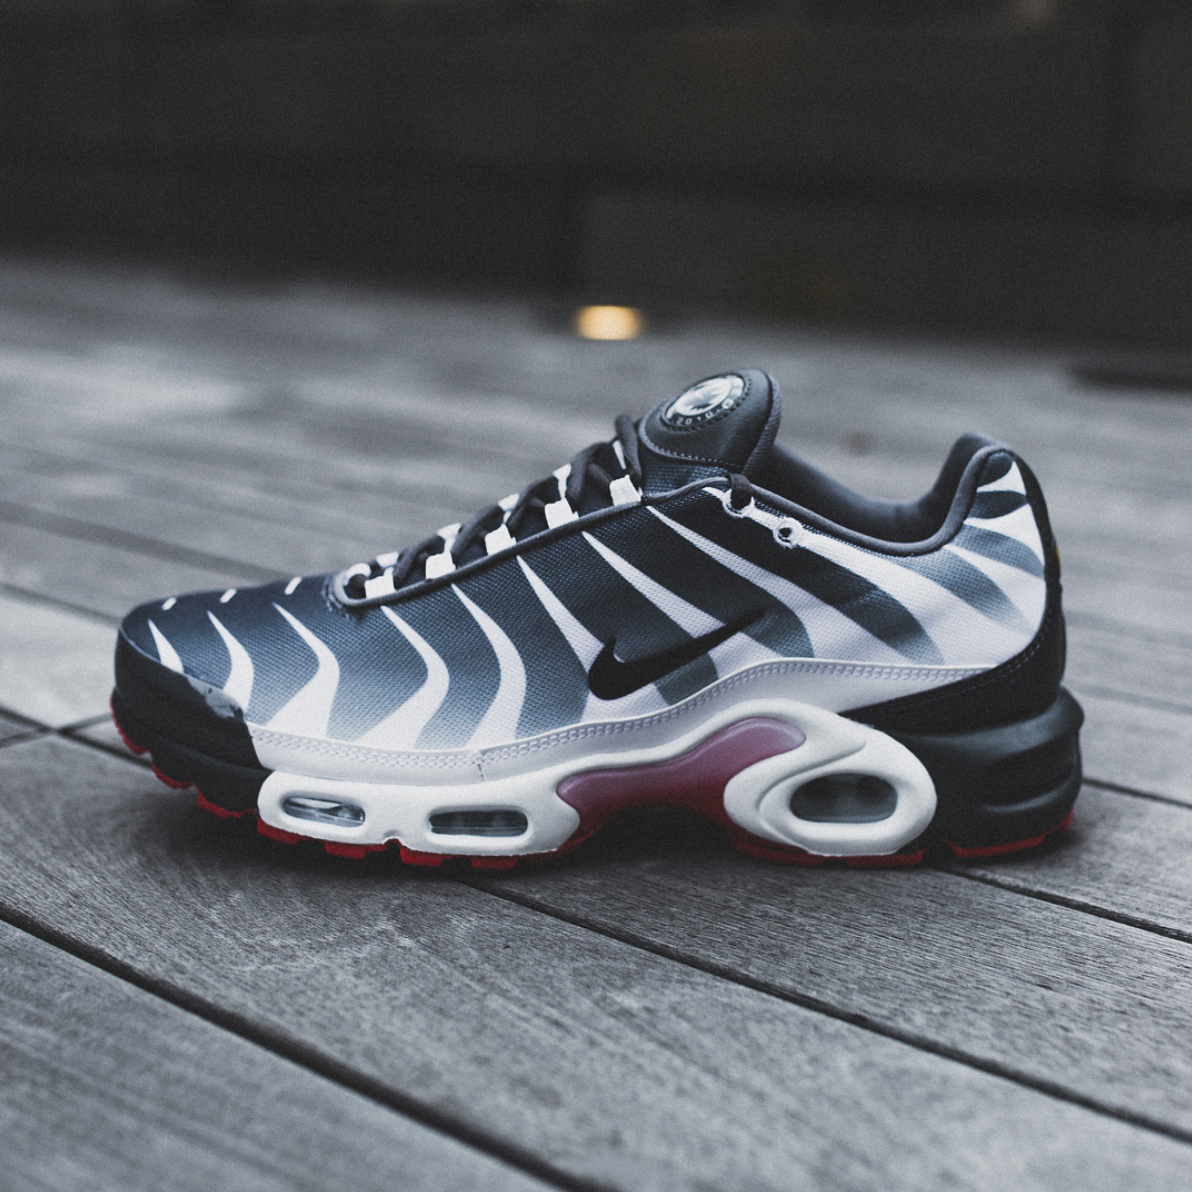 air max plus after the bite on feet